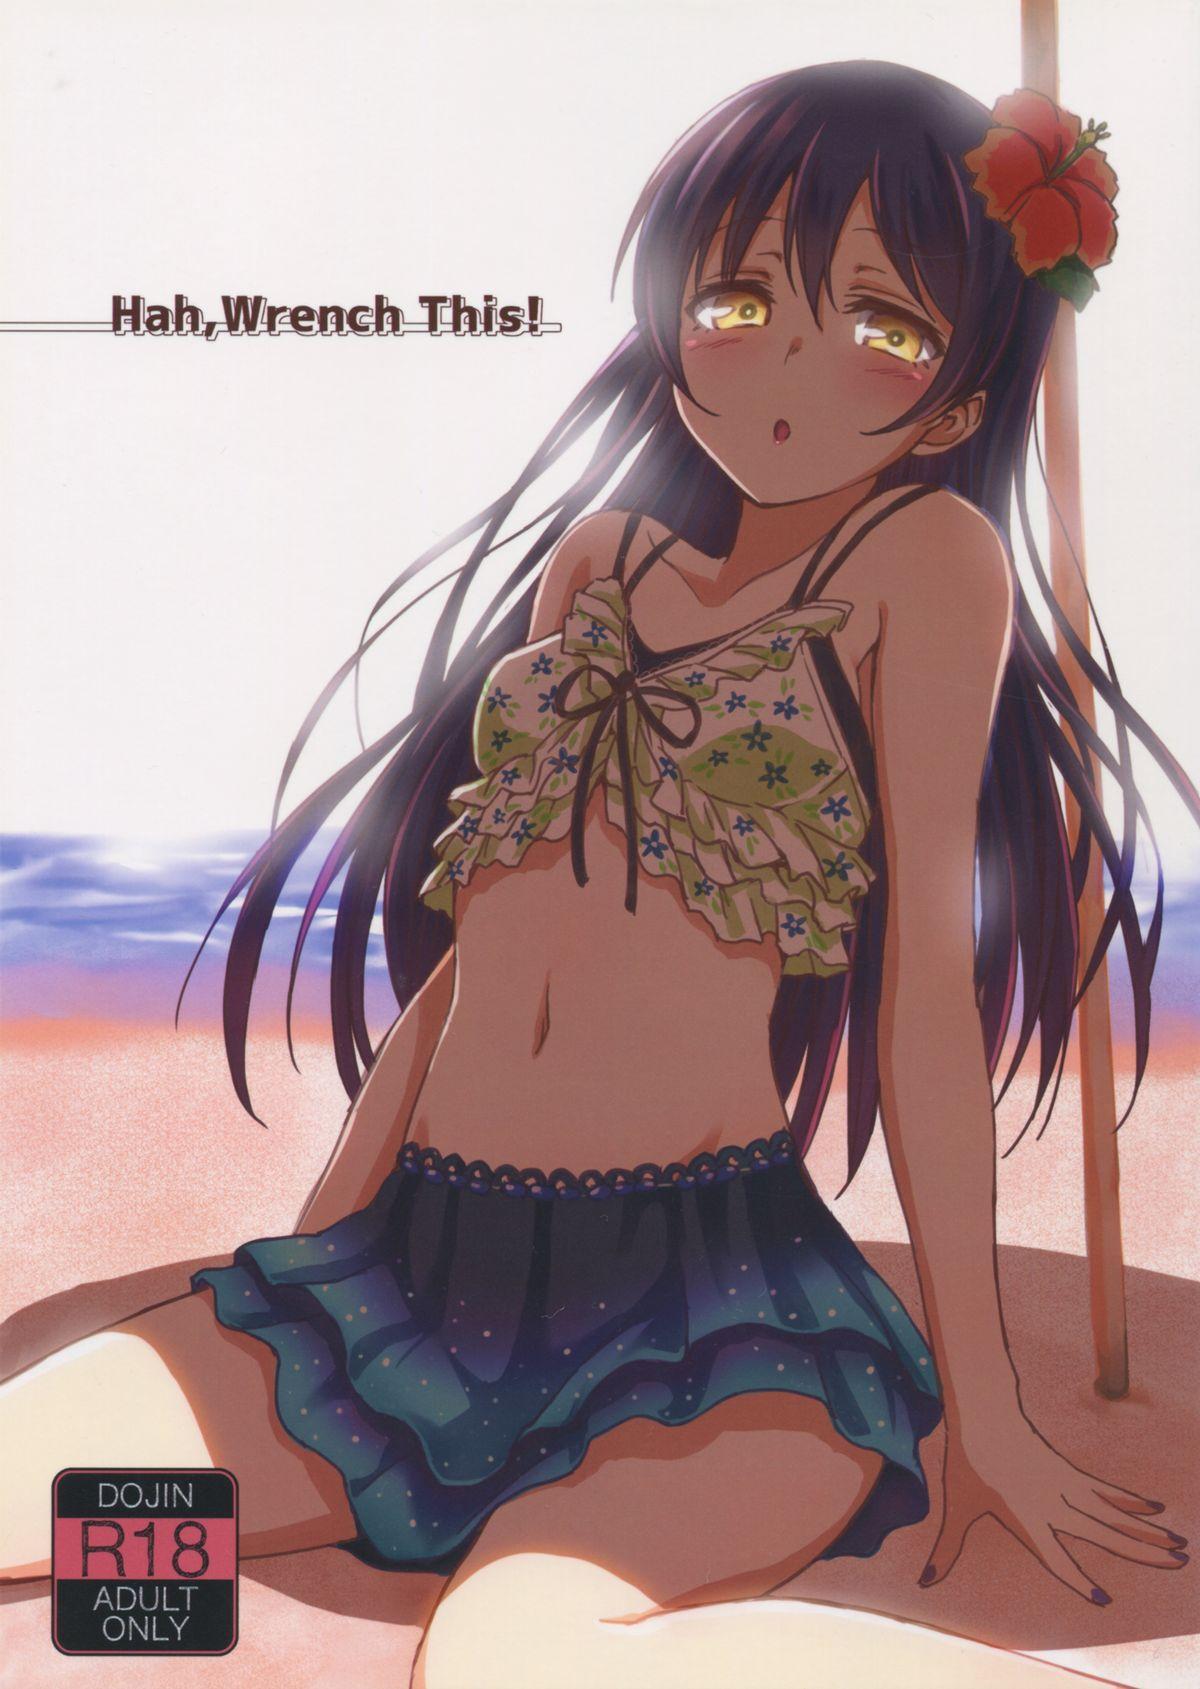 Jav Hah,Wrench This! - Love live Cash - Page 2